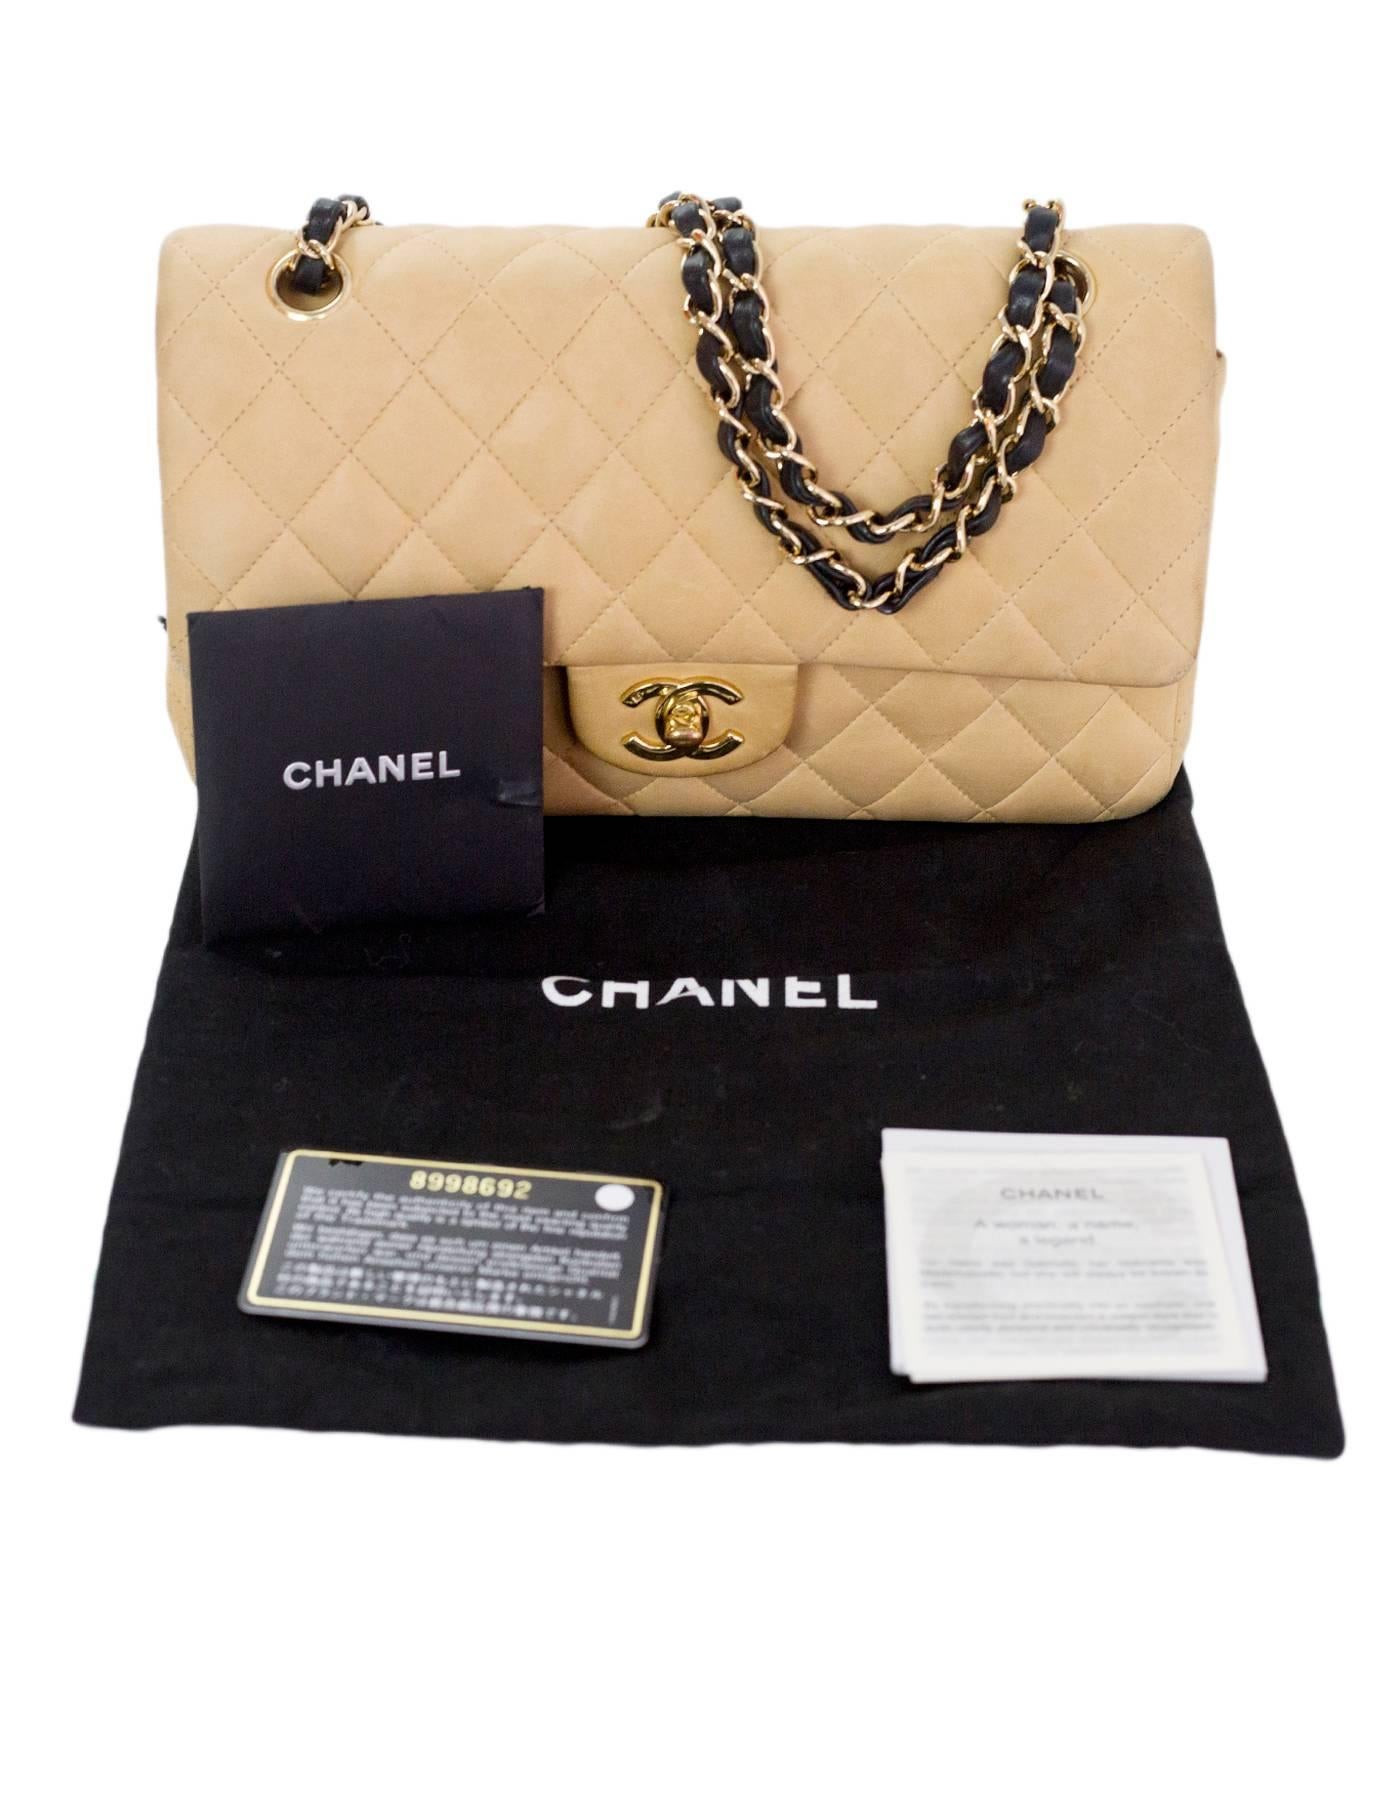 Chanel Beige & Black Quilted Lambskin Double Flap Bag with DB 4